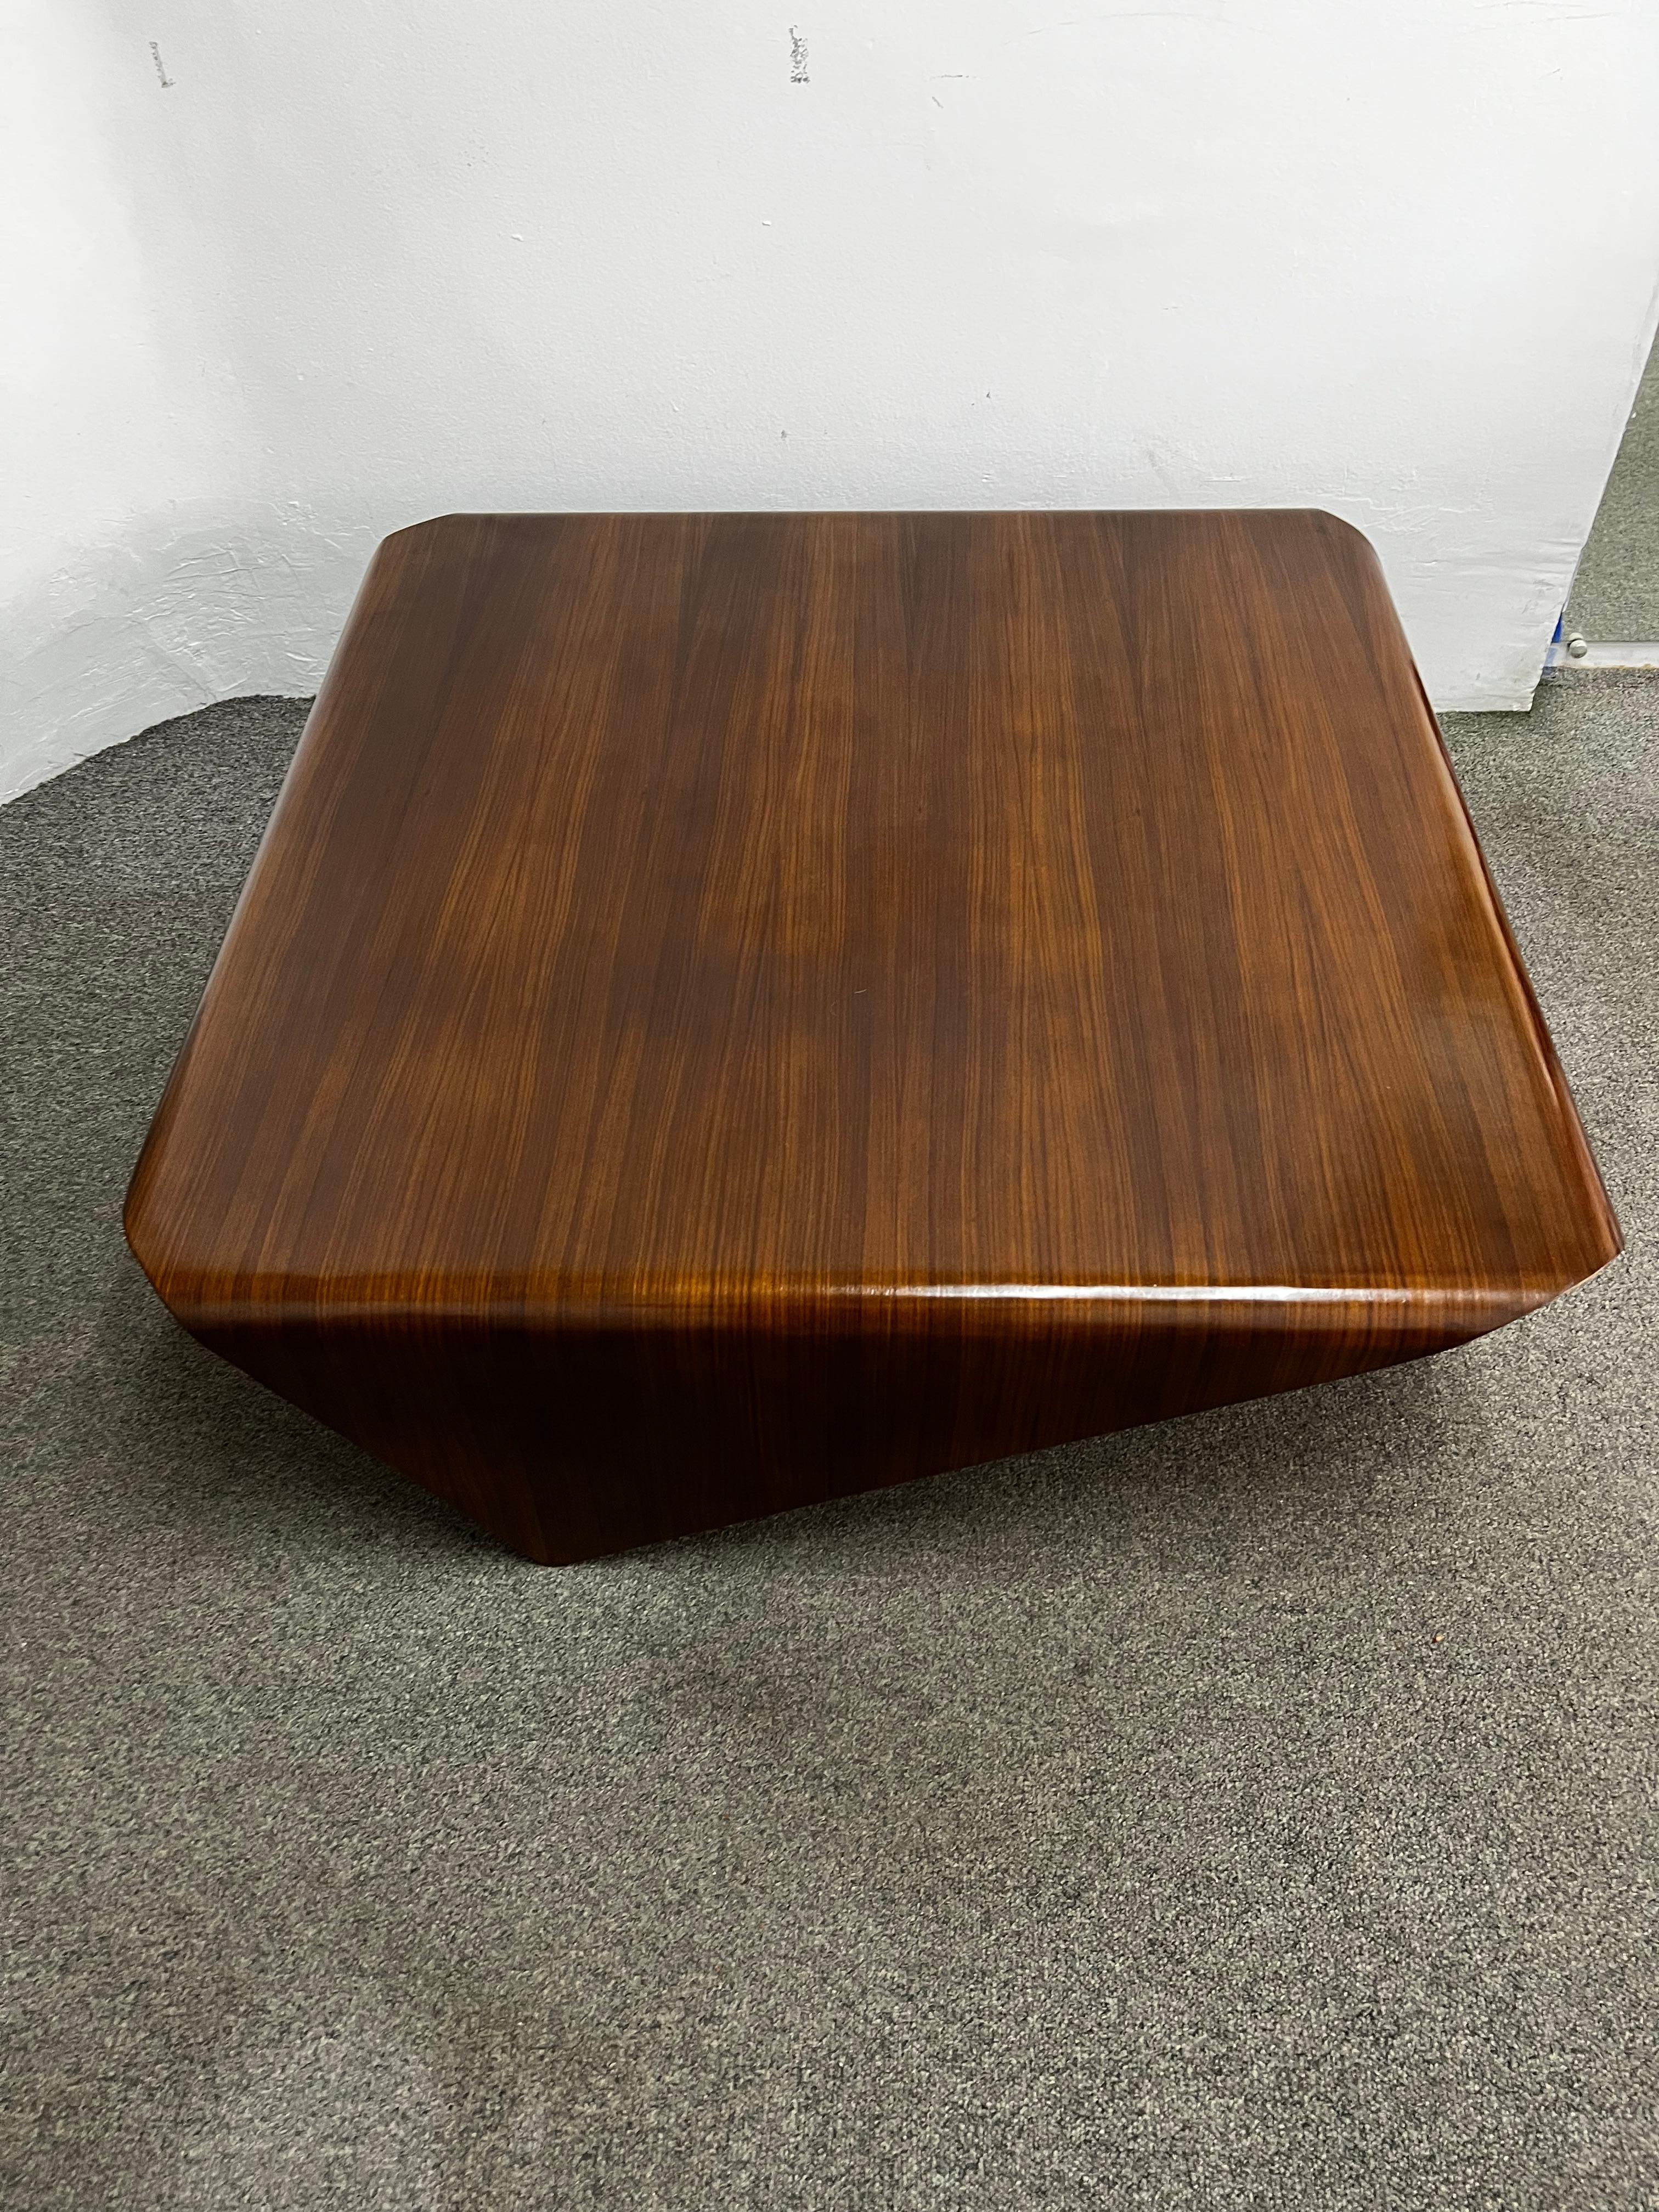 Beautiful original vintage Andorinha Coffee table in Pau Ferro (brazilian hardwood) by brazilian designer Jorge Zalszupin.

The item was restored by professionals and its in great vintage condition.

Please feel free to ask us for more pictures,